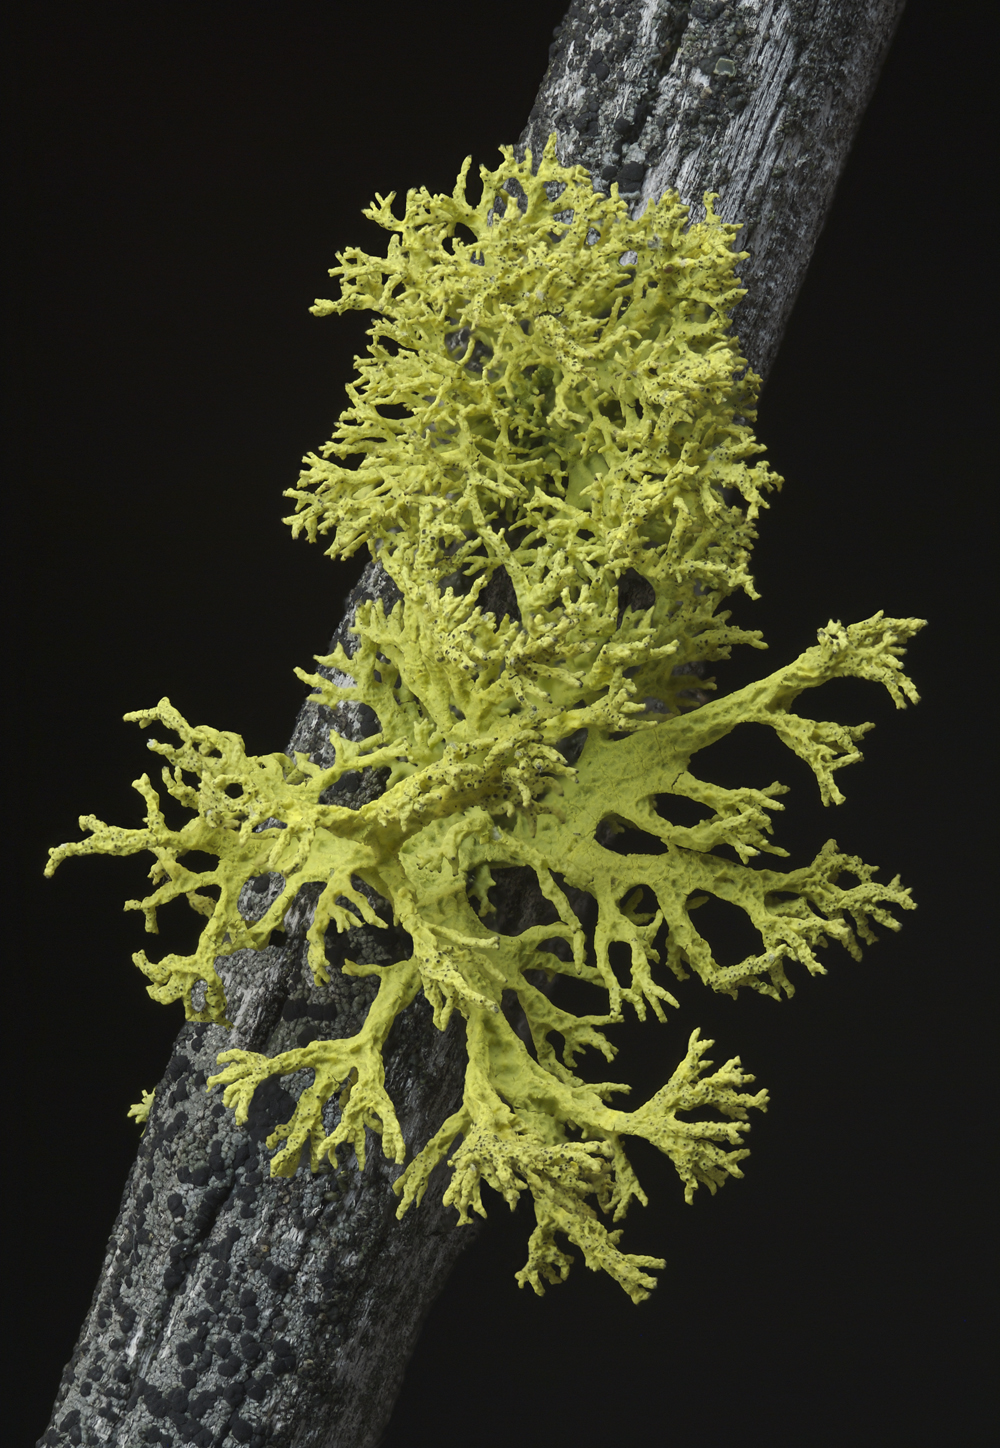 We’ve Been Wrong About Lichen For 150 Years